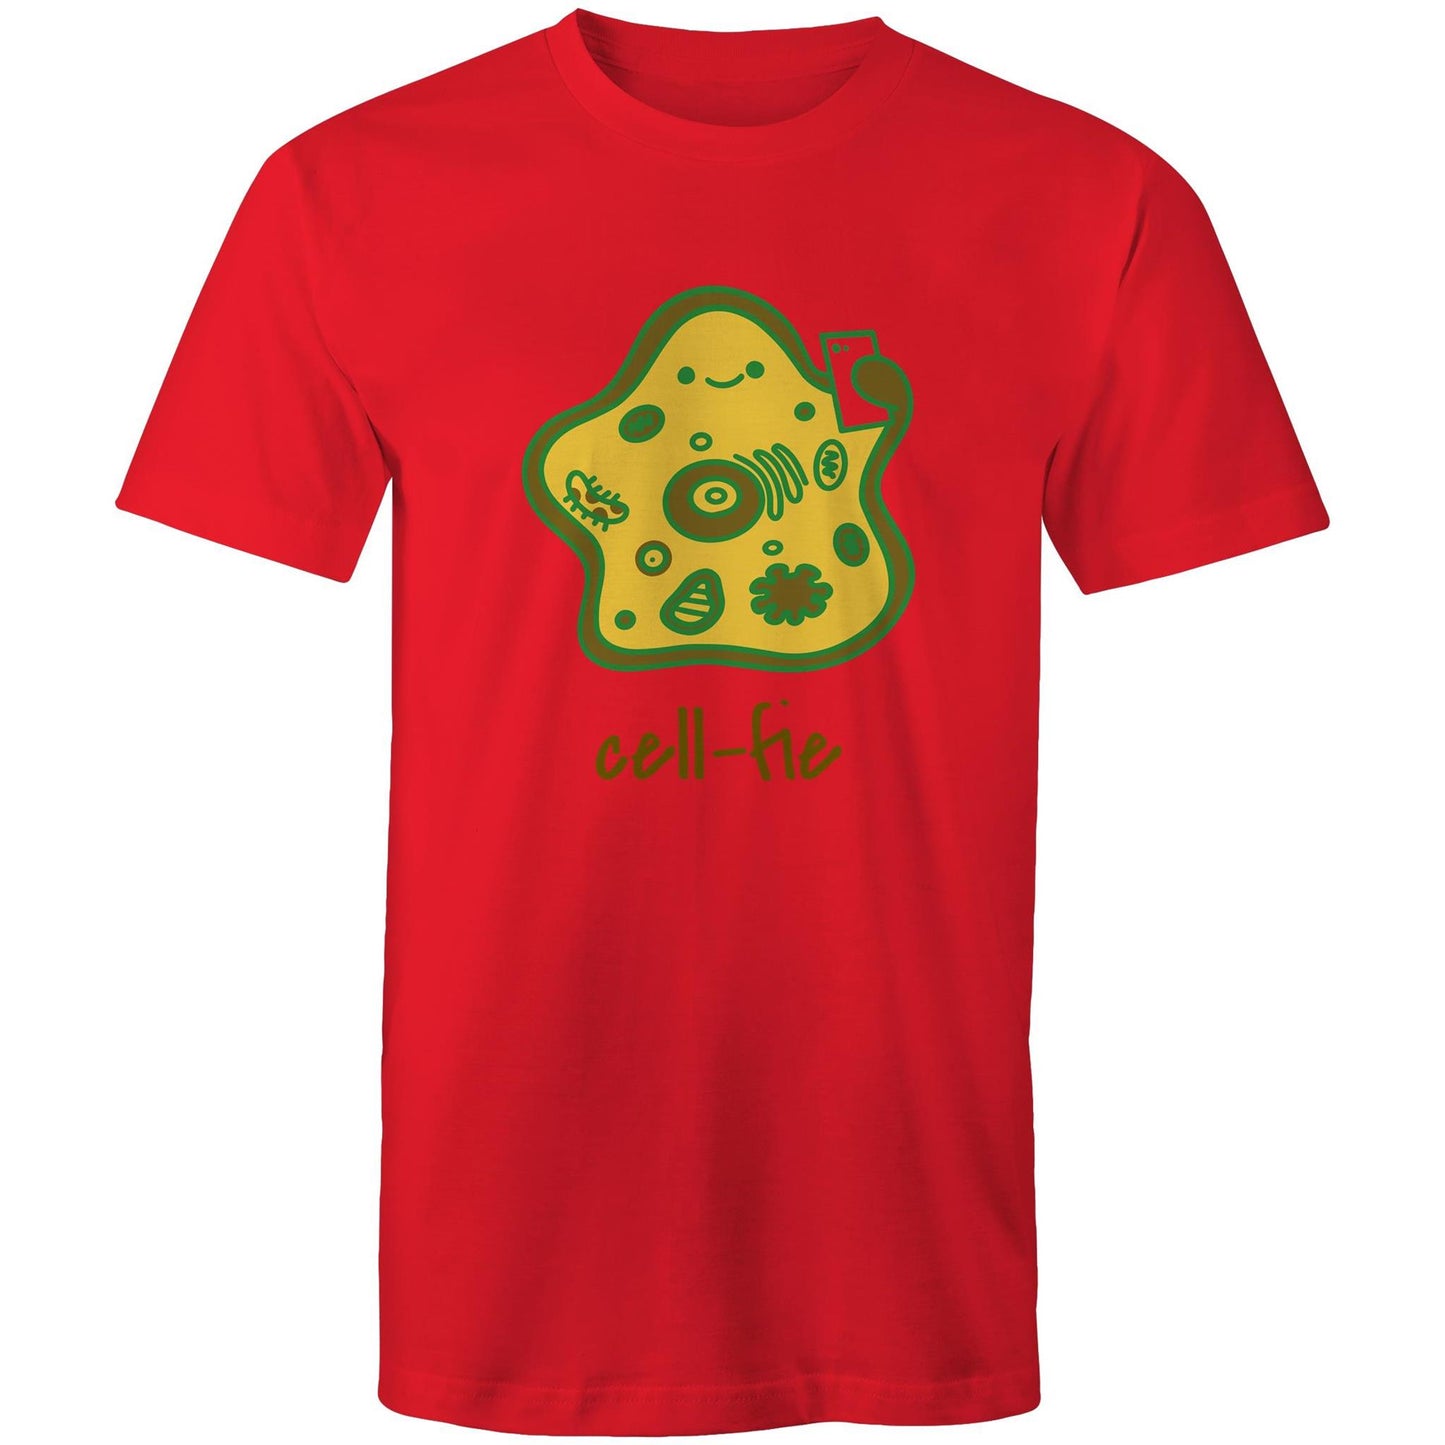 Cell-fie - Mens T-Shirt Red Mens T-shirt Science